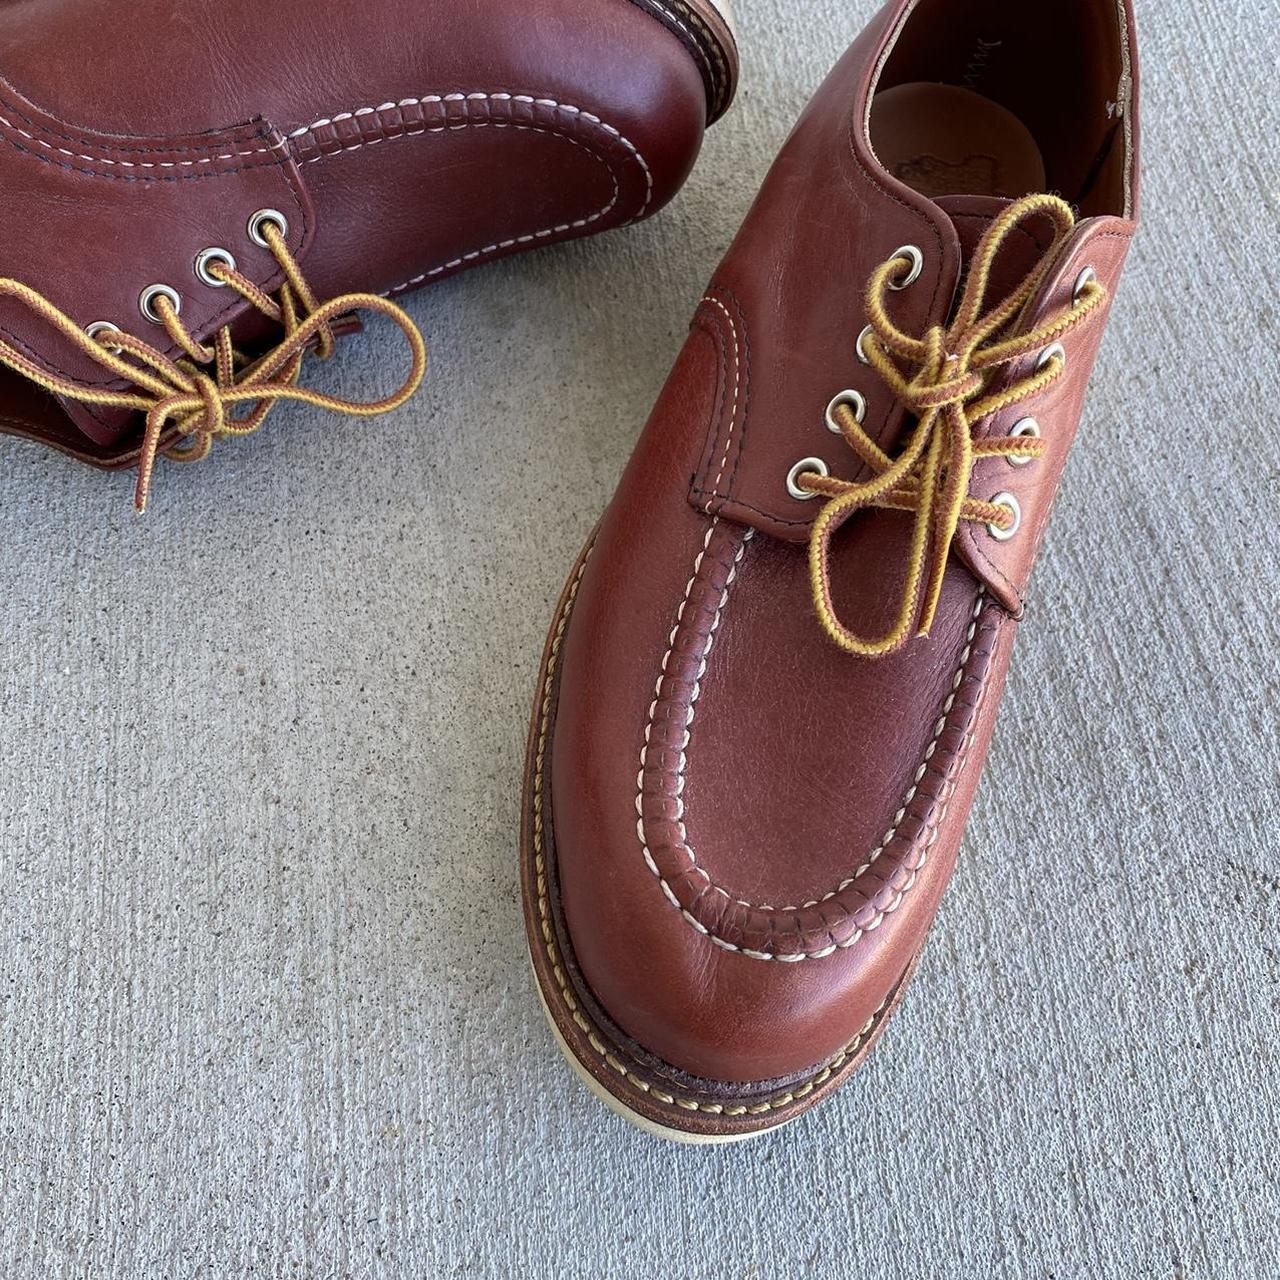 Redwing Men's Burgundy and Brown Boots | Depop